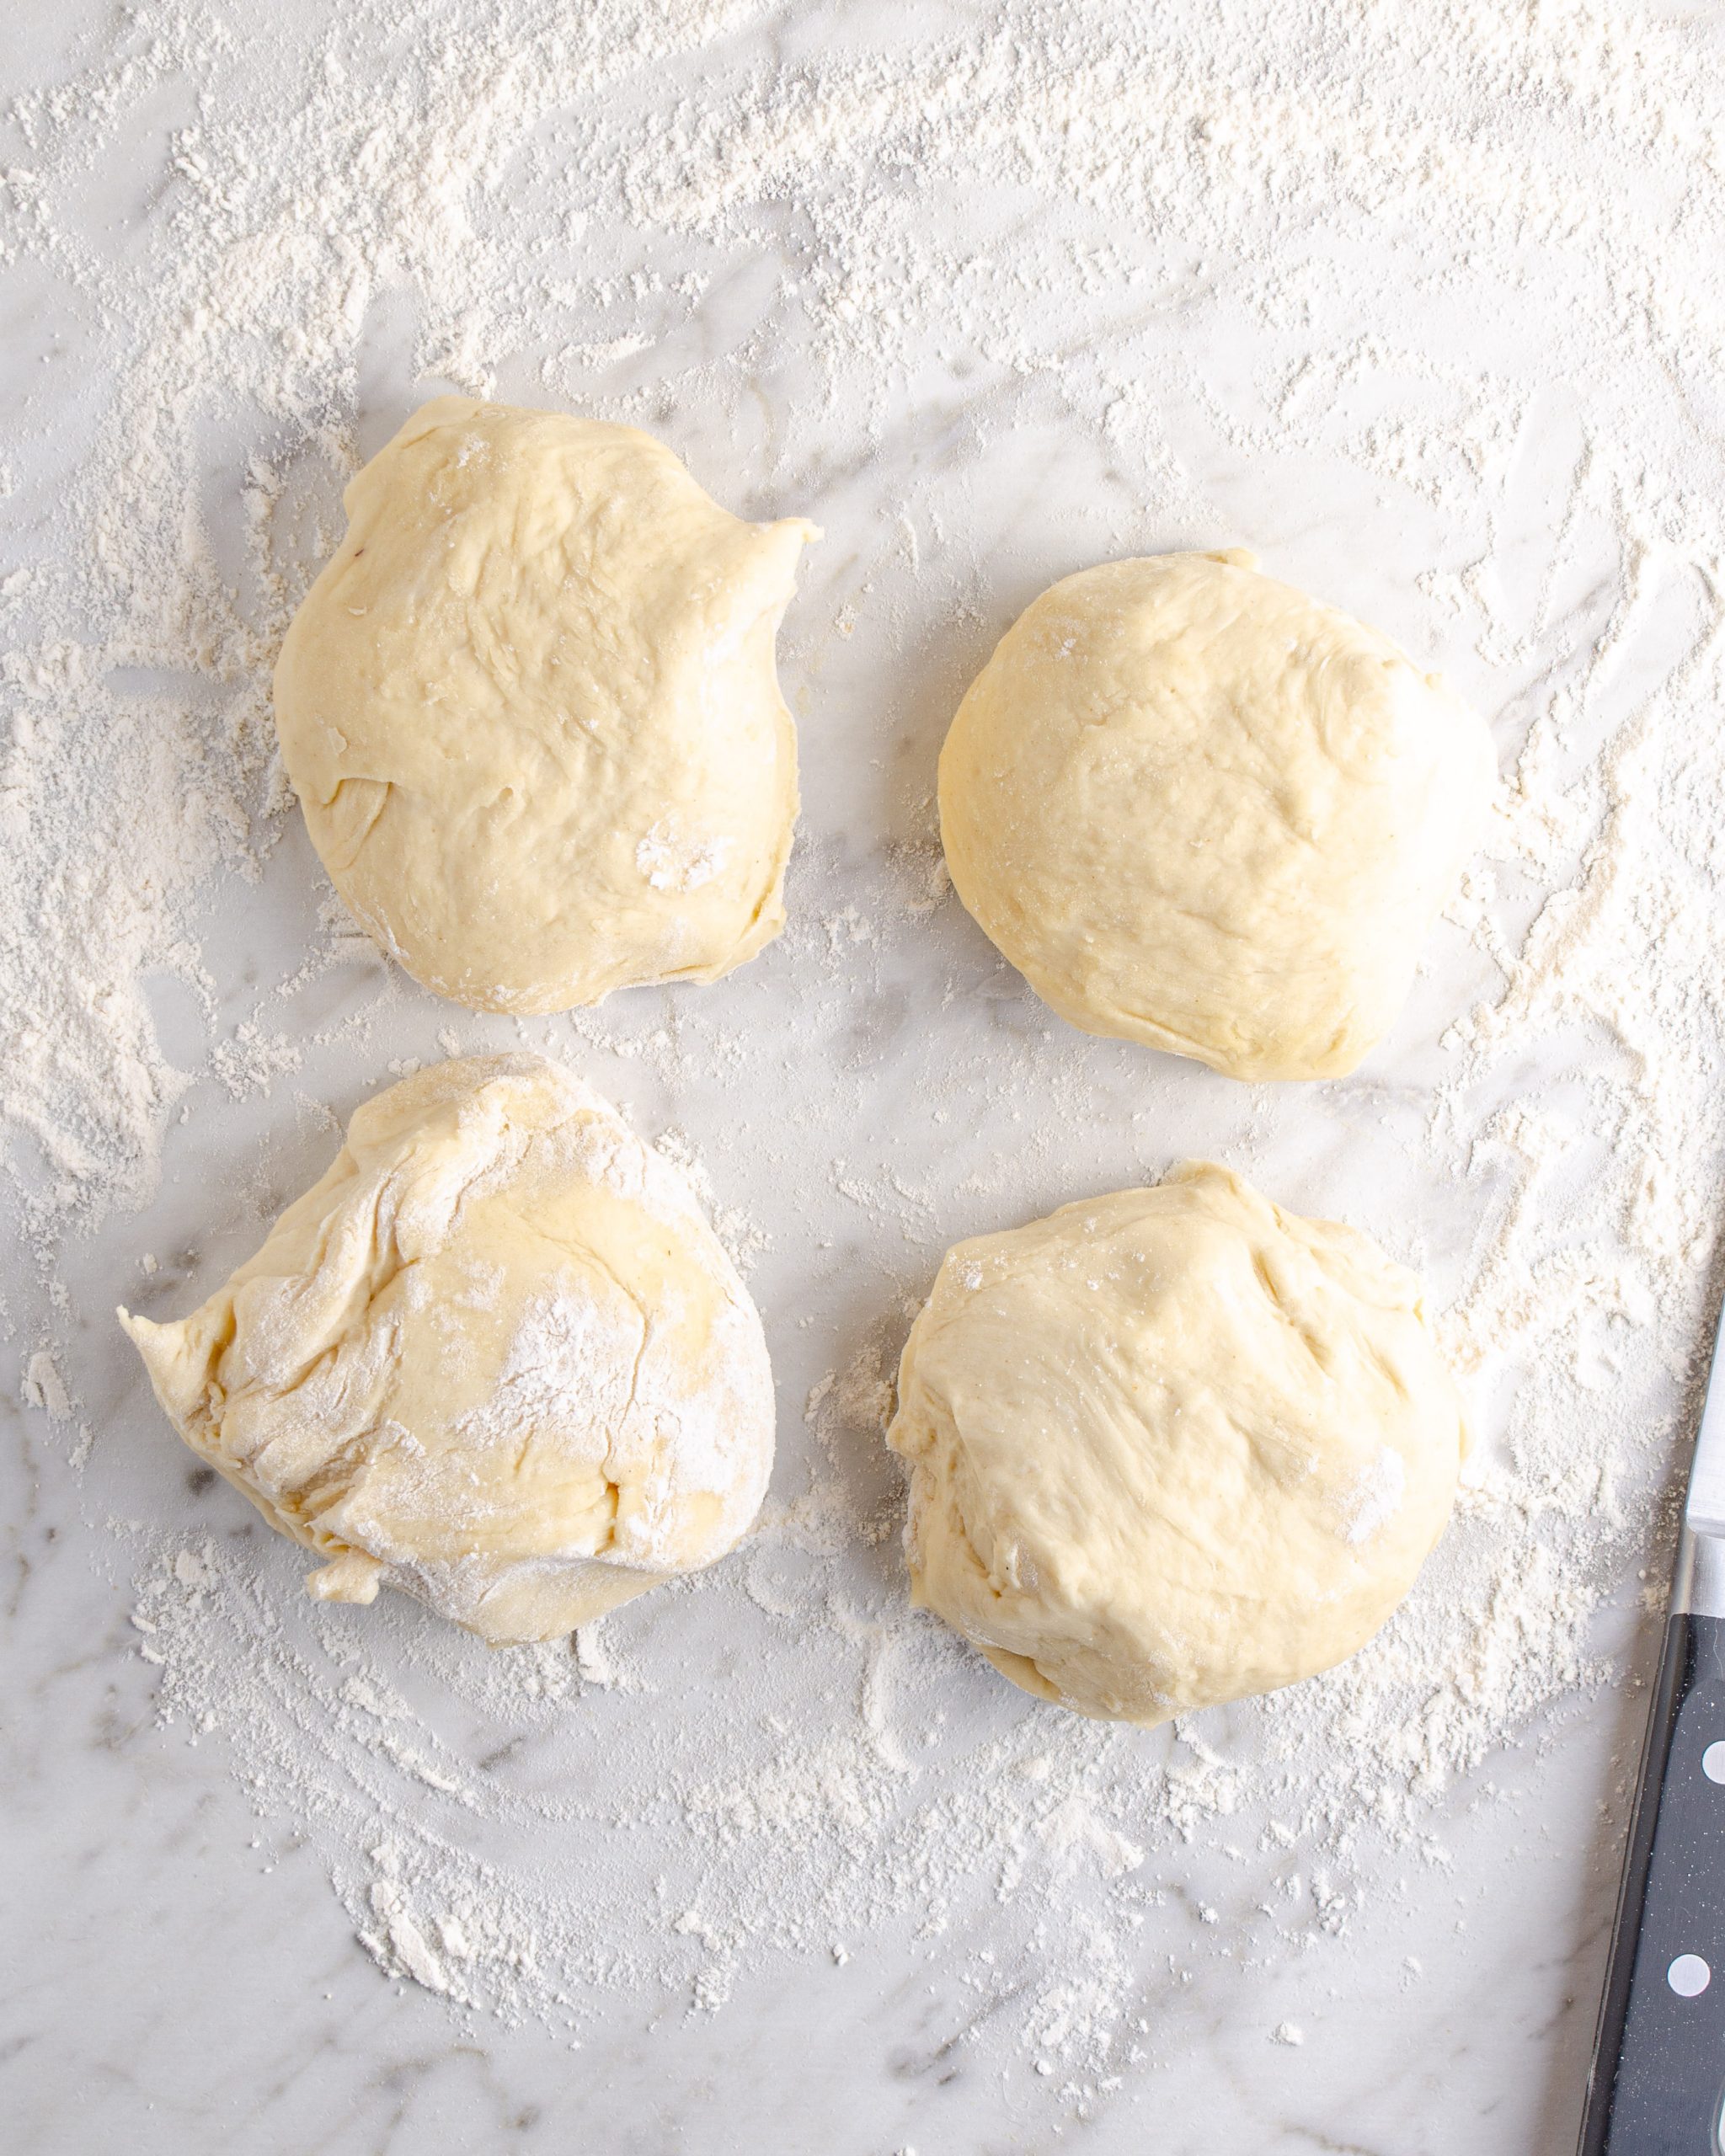 Make four even sections with the dough, and roll each section into a log shape on a floured surface. Each log of dough should be no more than 2 inches wide.